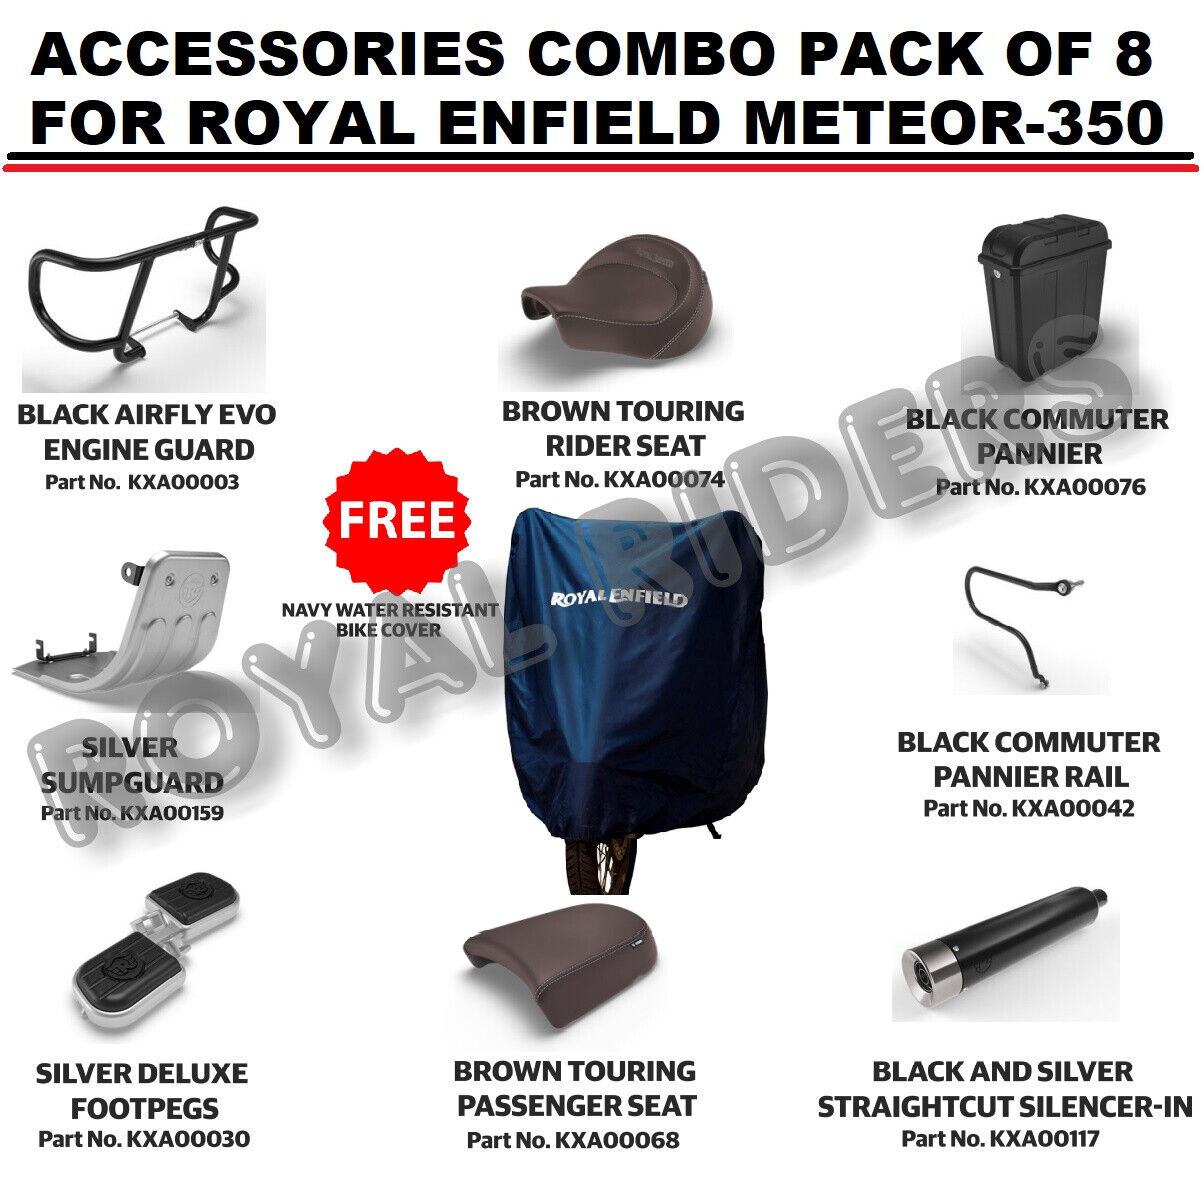 ACCESSORIES COMBO PACK OF 8 for Fits Royal Enfield METEOR 350 -